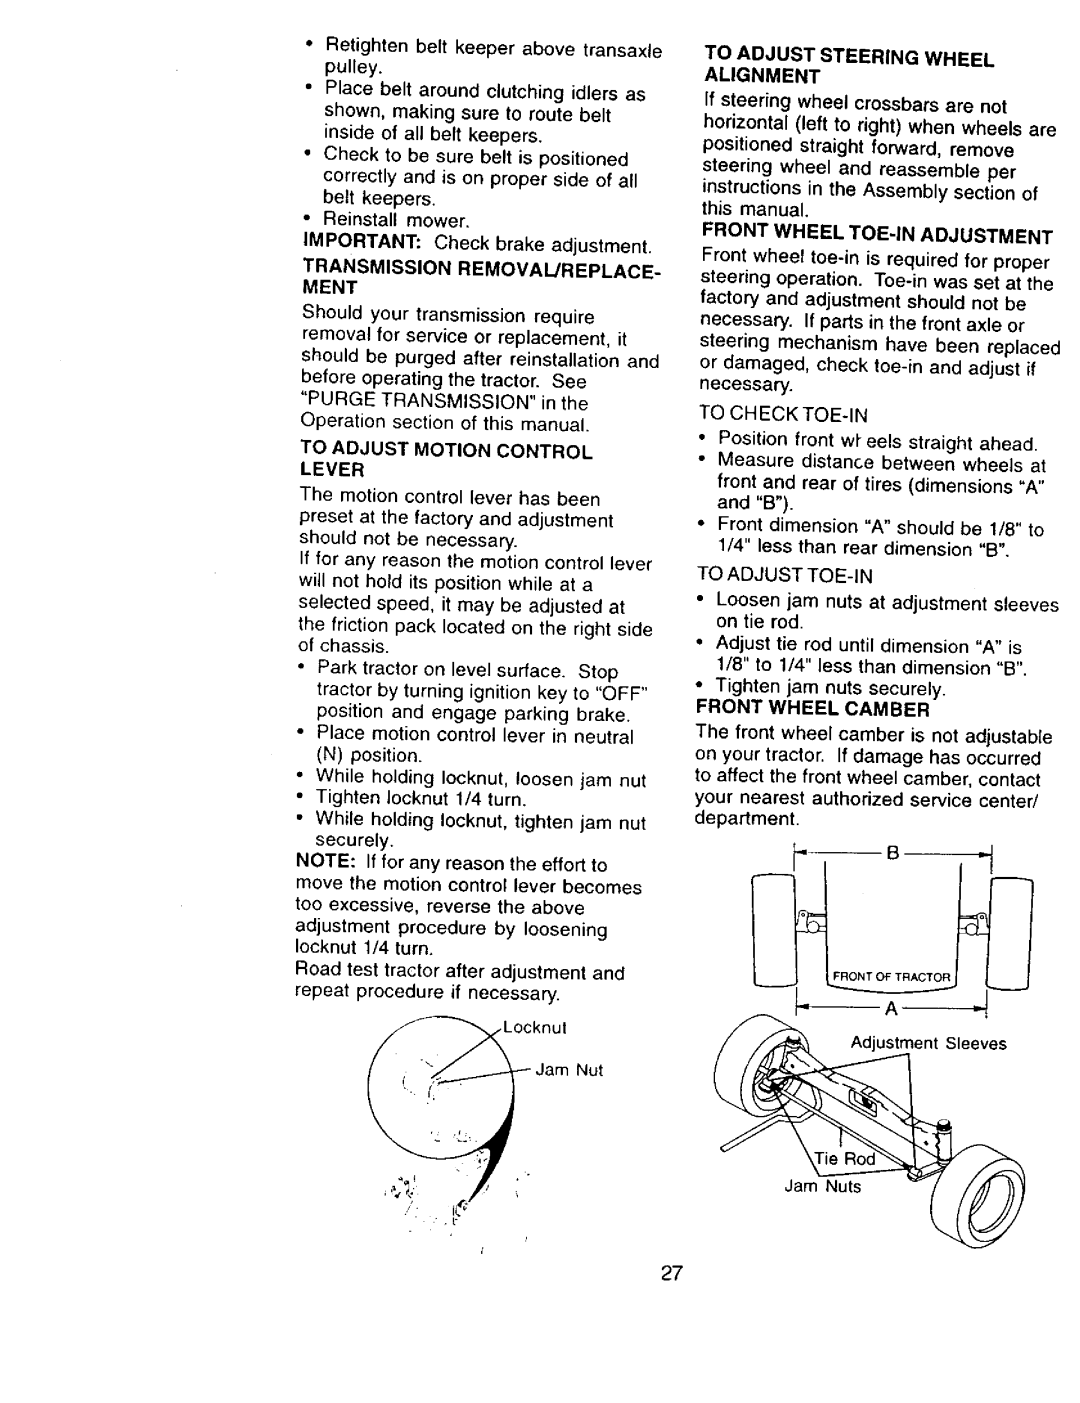 Craftsman 917.273322 Transmission Removal/Replace- Ment, To Adjust Motion Control Lever, Front Wheel Toe-Inadjustment 